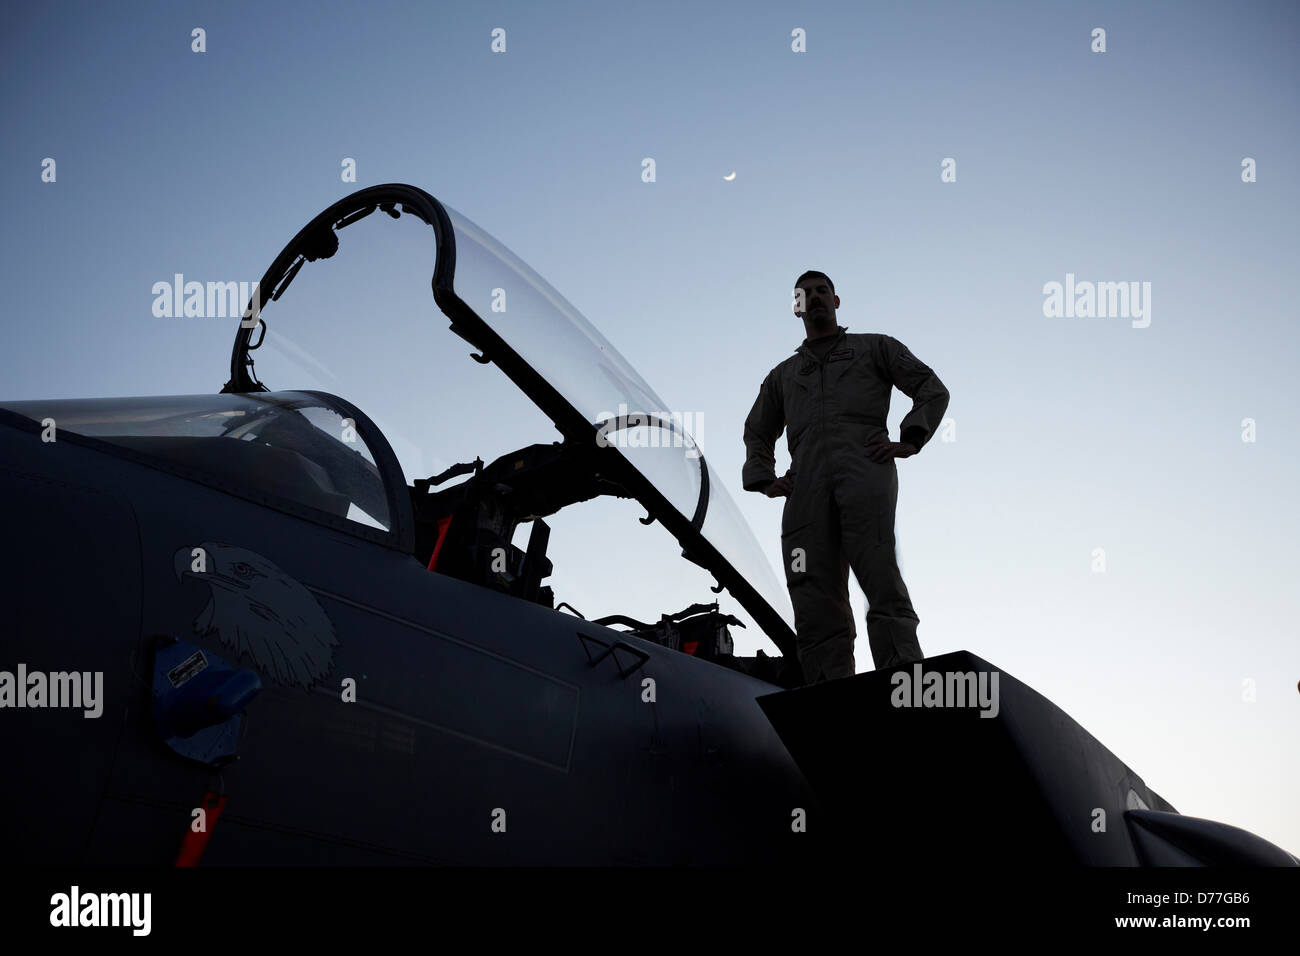 Afghanistan Bagram Bagram Airfield Silhouette United States Air Force F-15E Strike Eagle pilot stehende Spitze Nase f-15 durch Stockfoto